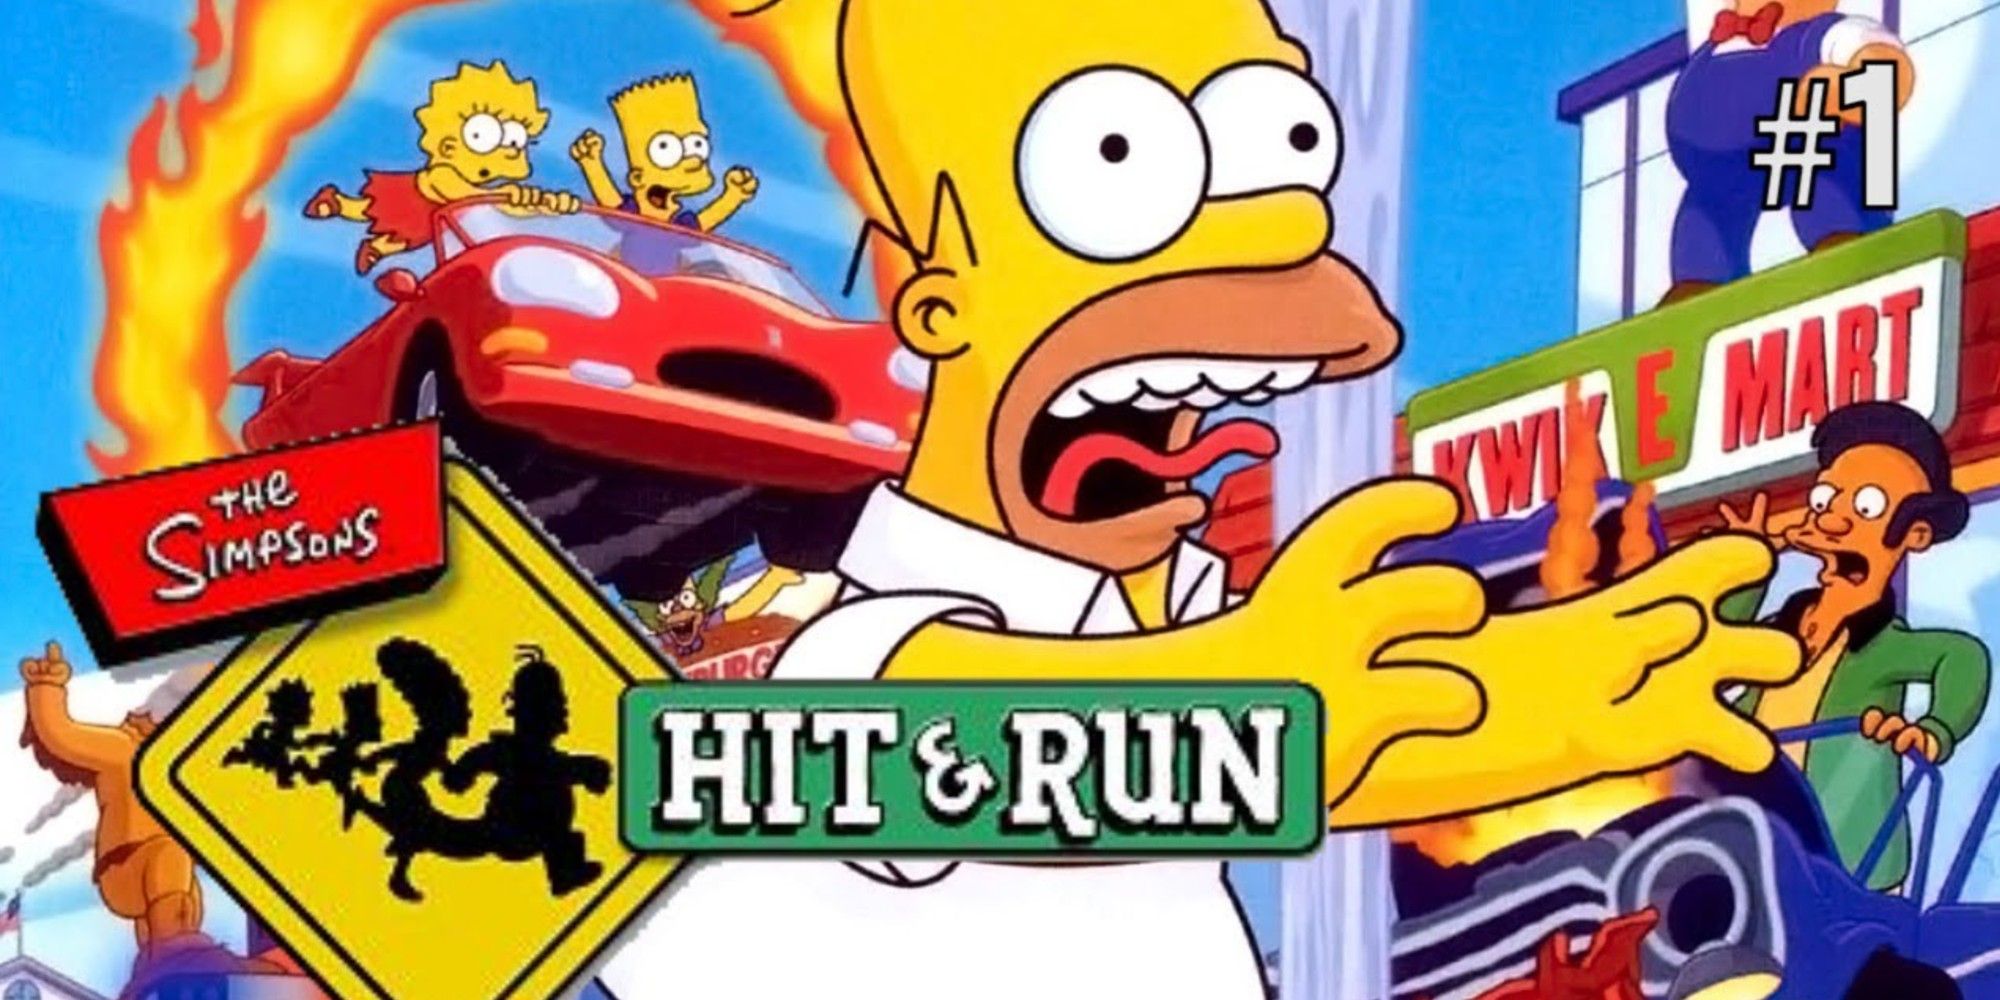 The Simpsons hit and run poster